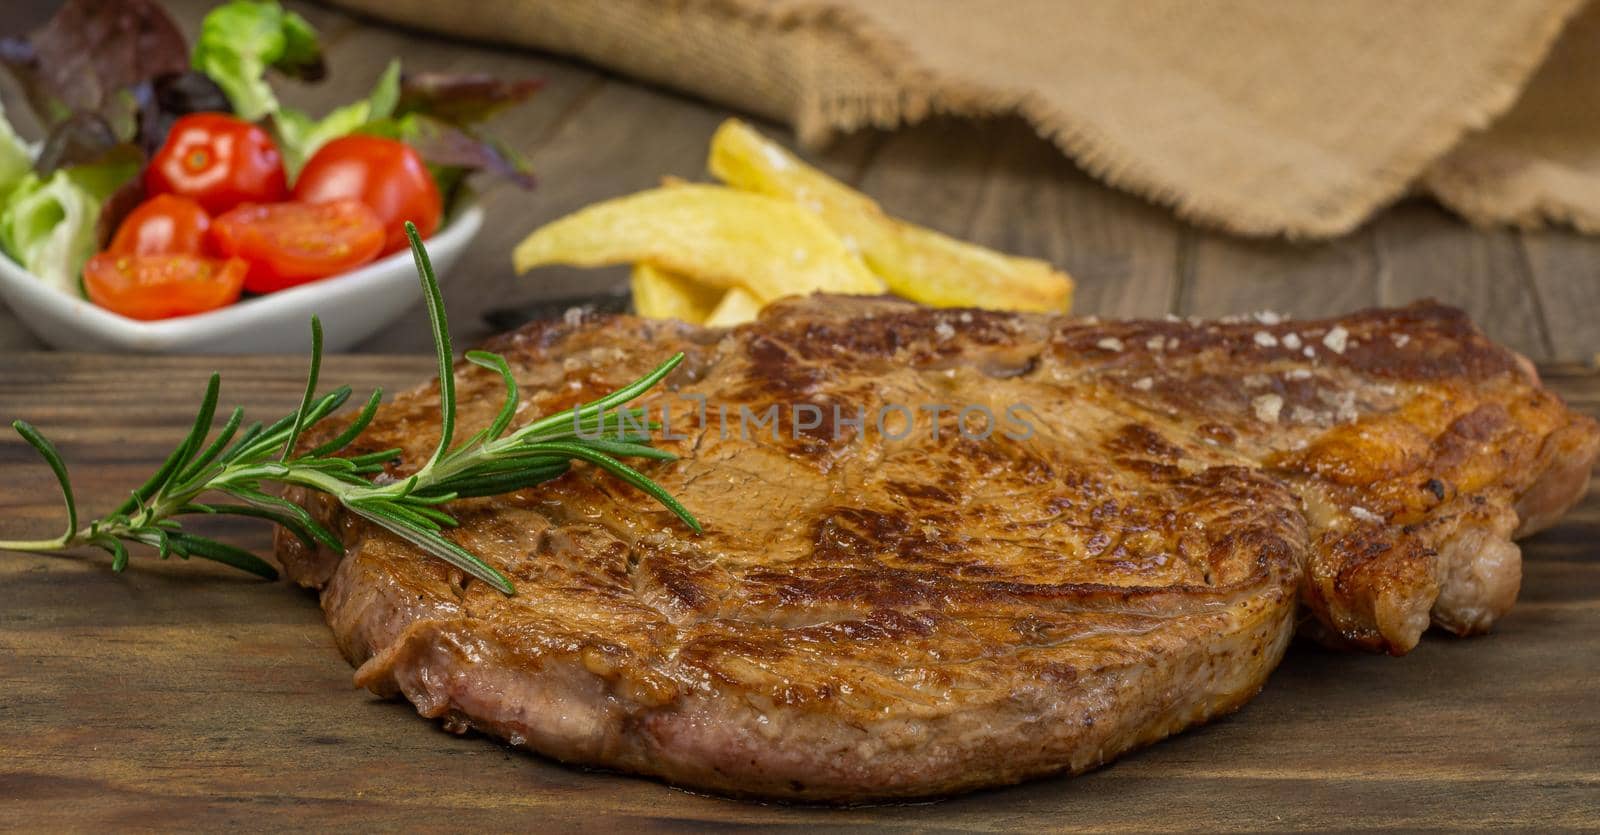 Veal cutlet from Avila, Spain with potatoes and vegetables juicy and tender